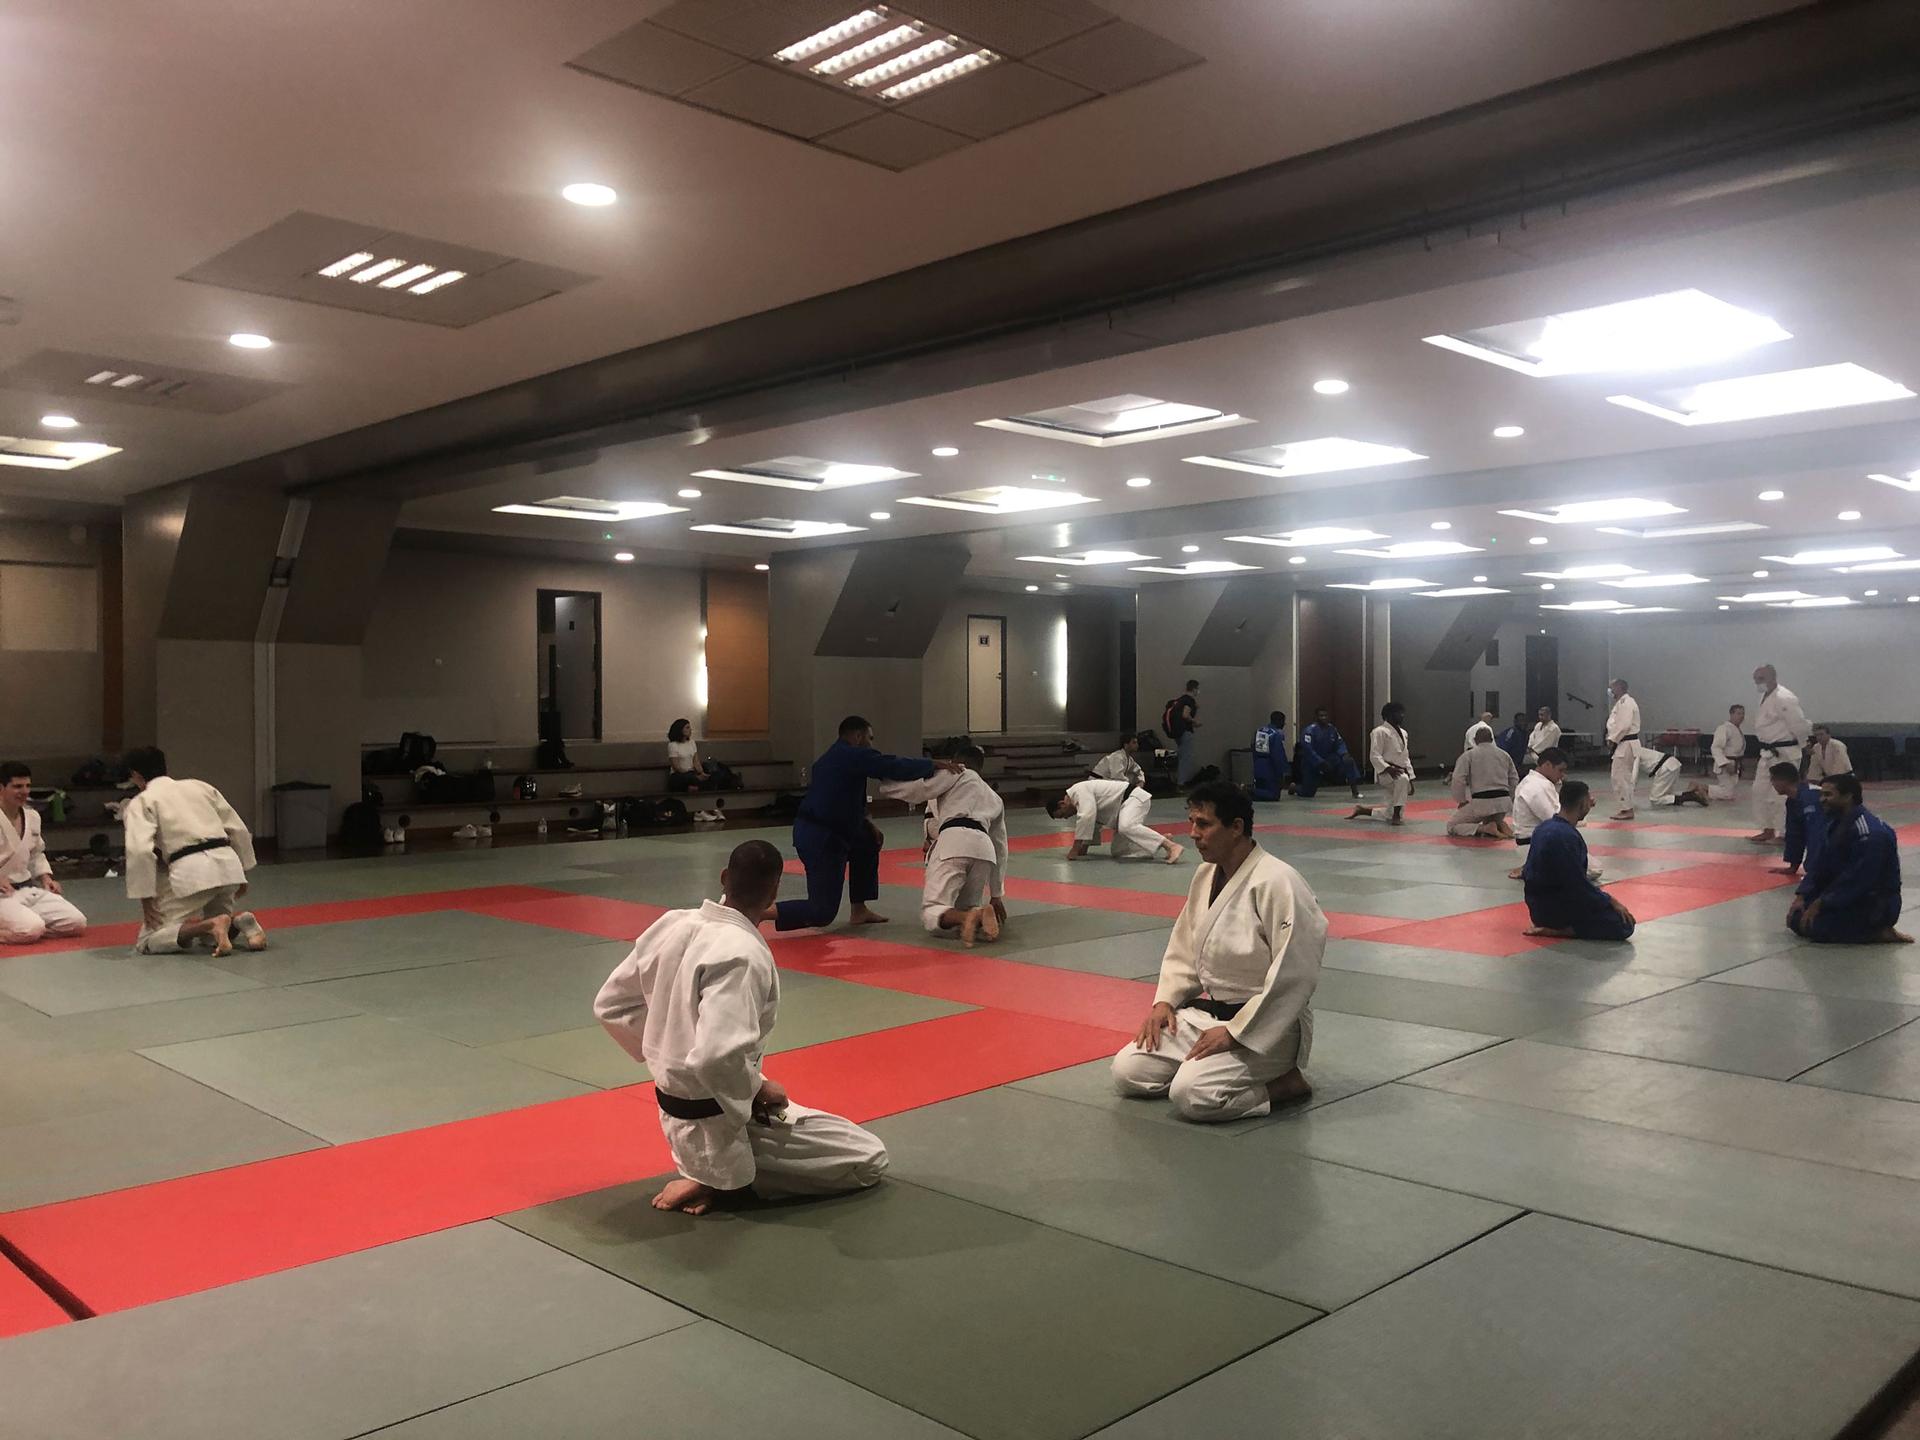 A judo training center on the southern edge of Paris is packed, even though it’s the start of the summer holiday season. 